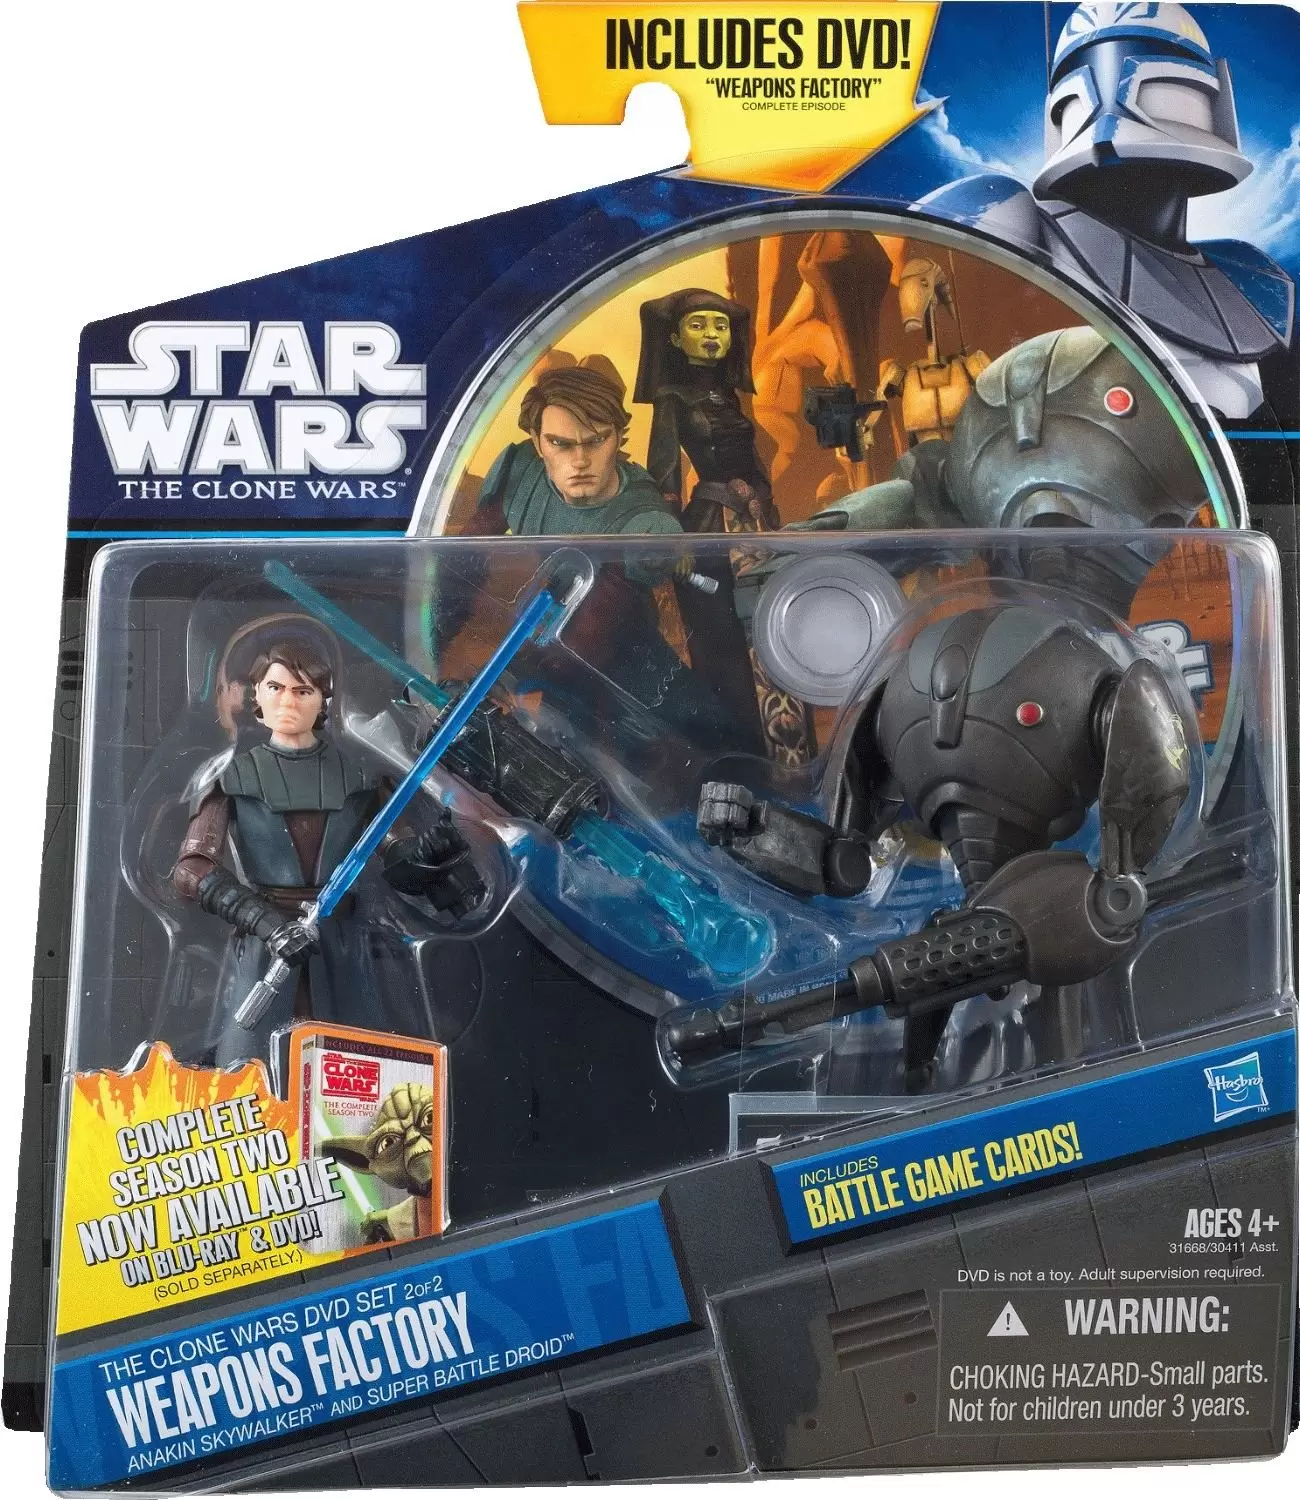 The Clone Wars - Shadow of the Dark Side - THE CLONE WARS DVD SET 2 of 2 WEAPONS FACTORY